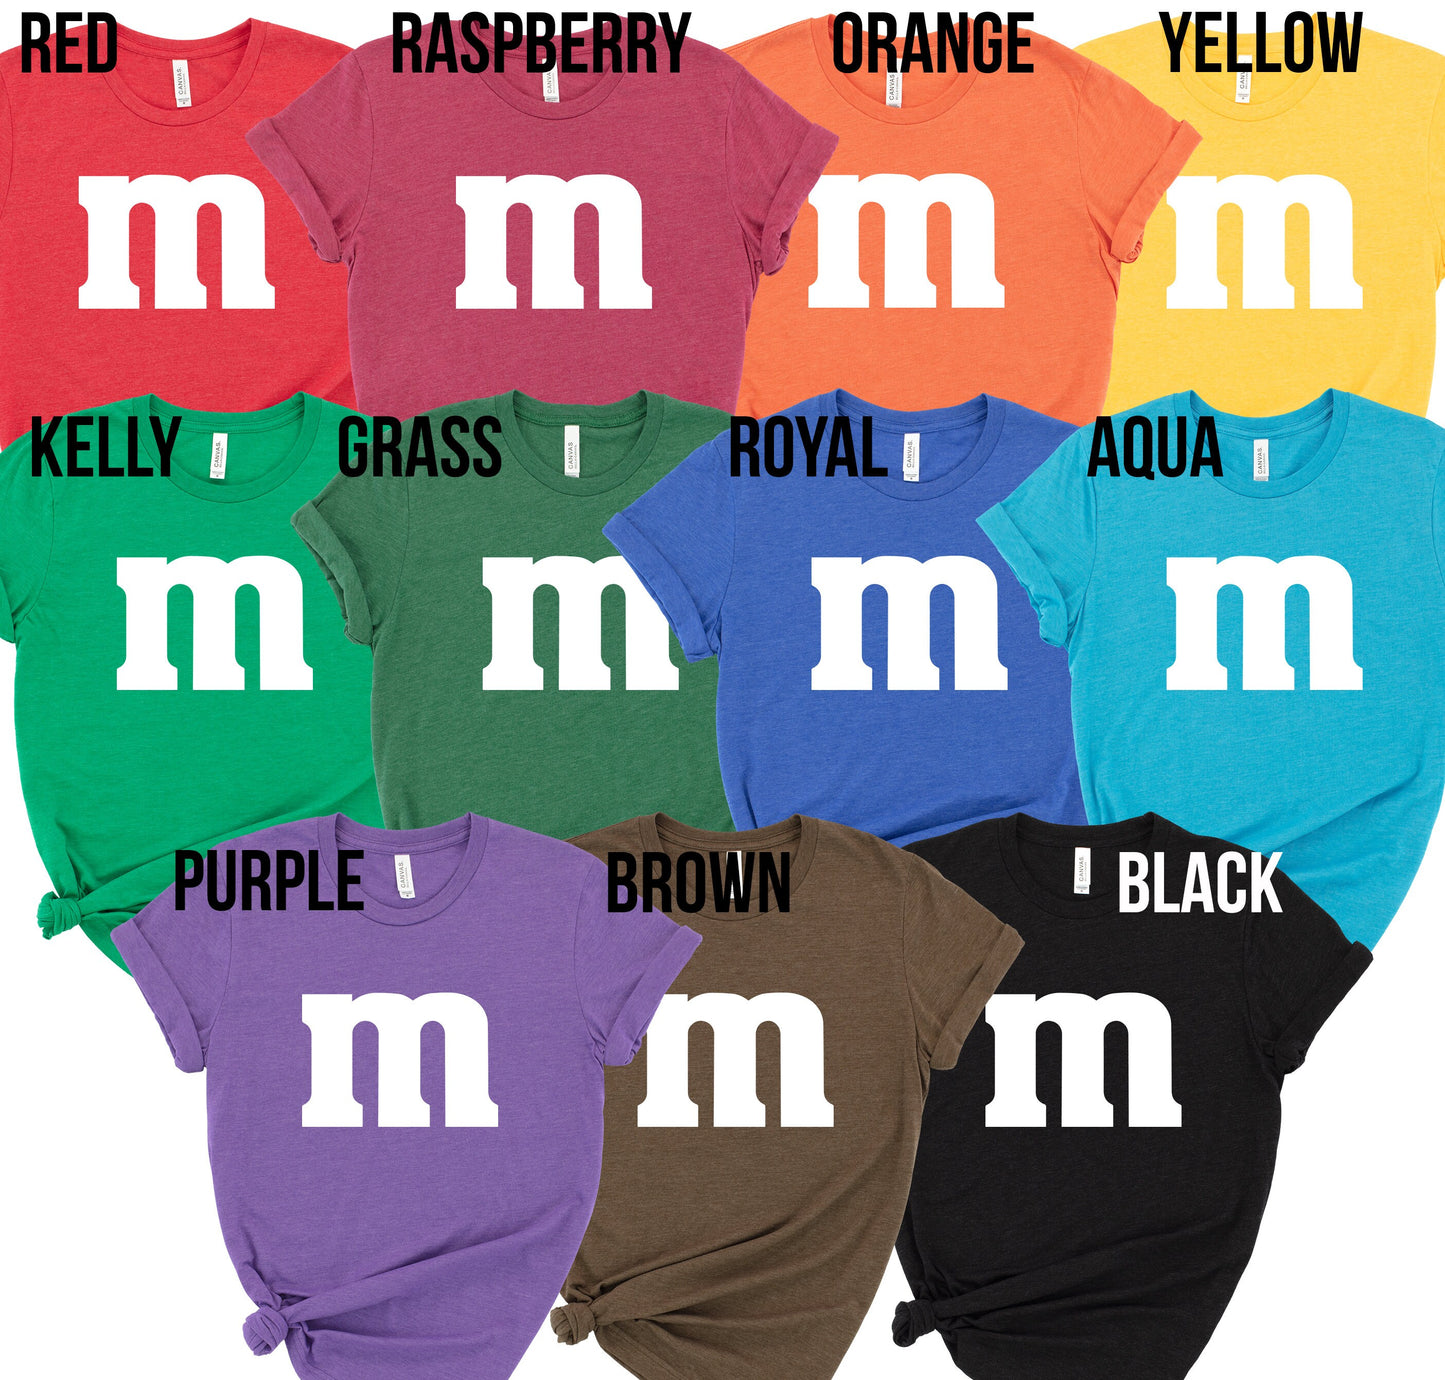 Deliciously Soft Letter M Costume Tees